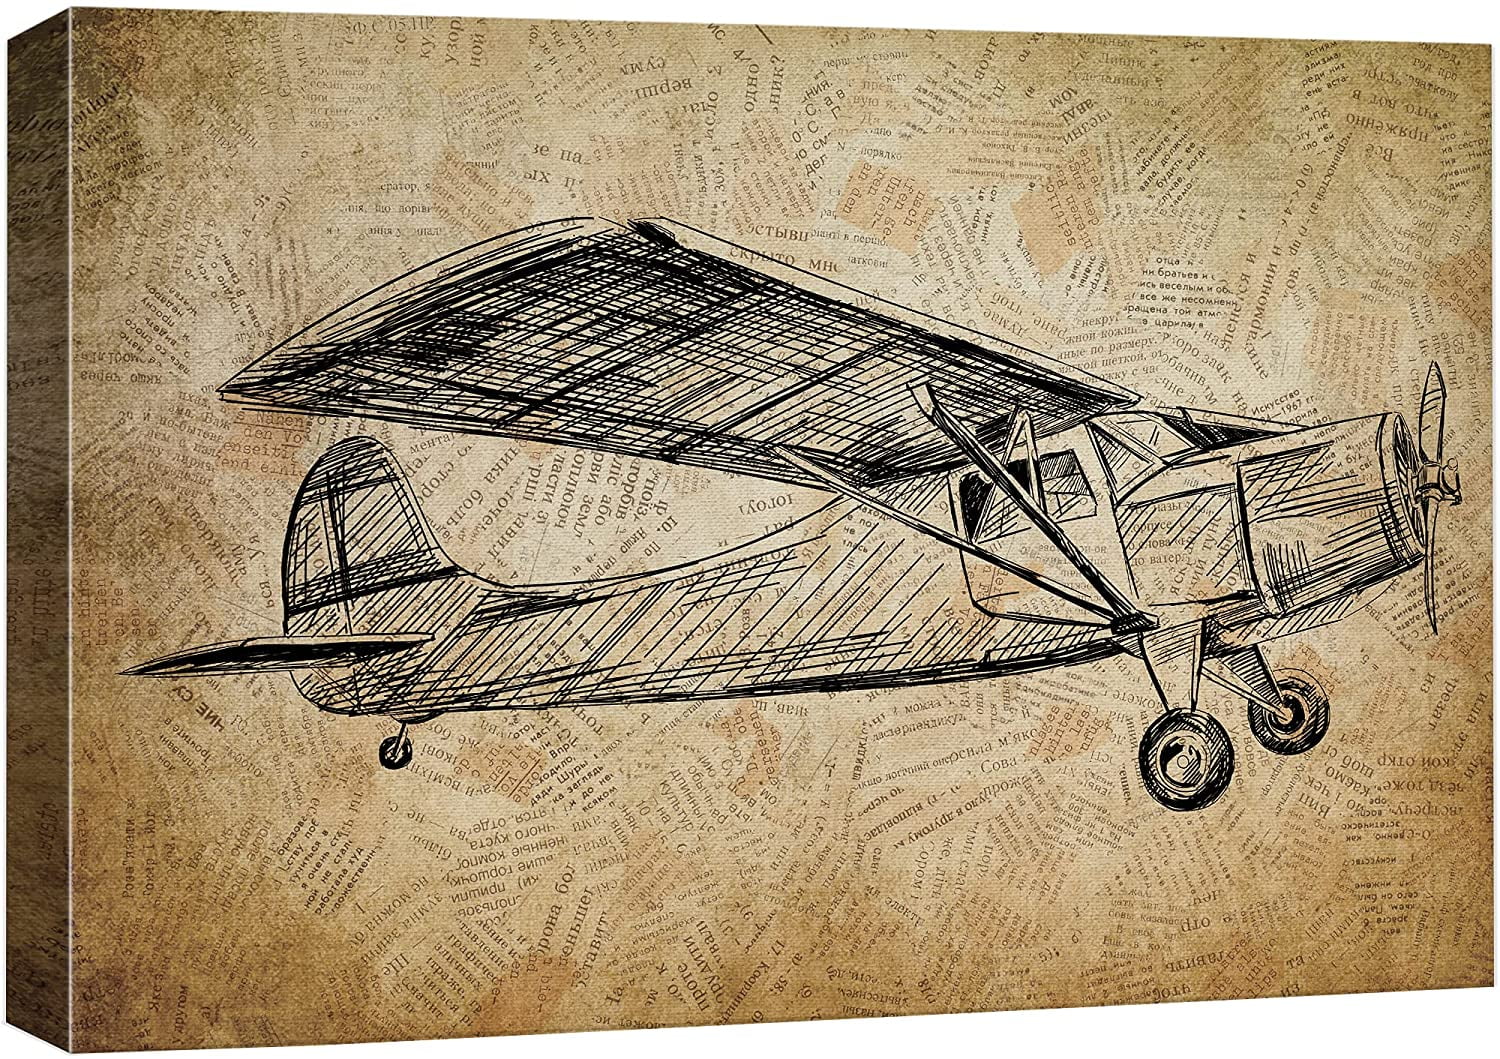 Single Airplane Sketch | Great PowerPoint ClipArt for Presentations -  PresenterMedia.com